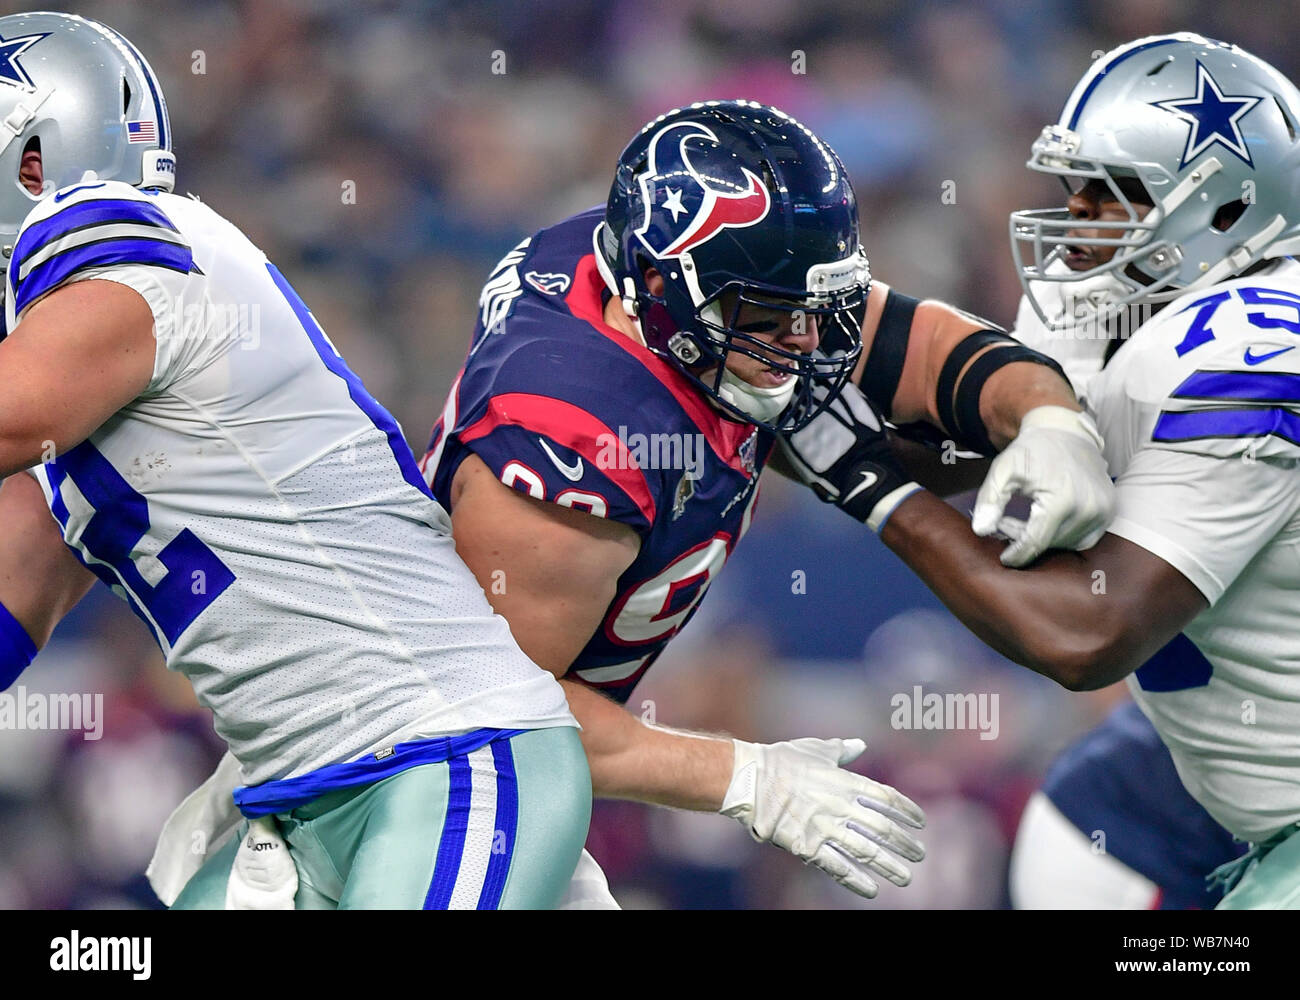 Arlington, Texas, USA. 24th August, 2019. Houston Texans defensive end J.J.  Watt (99) tries to elude Dallas Cowboys offensive tackle Cameron Fleming  (75).during an NFL football game between the Houston Texans and